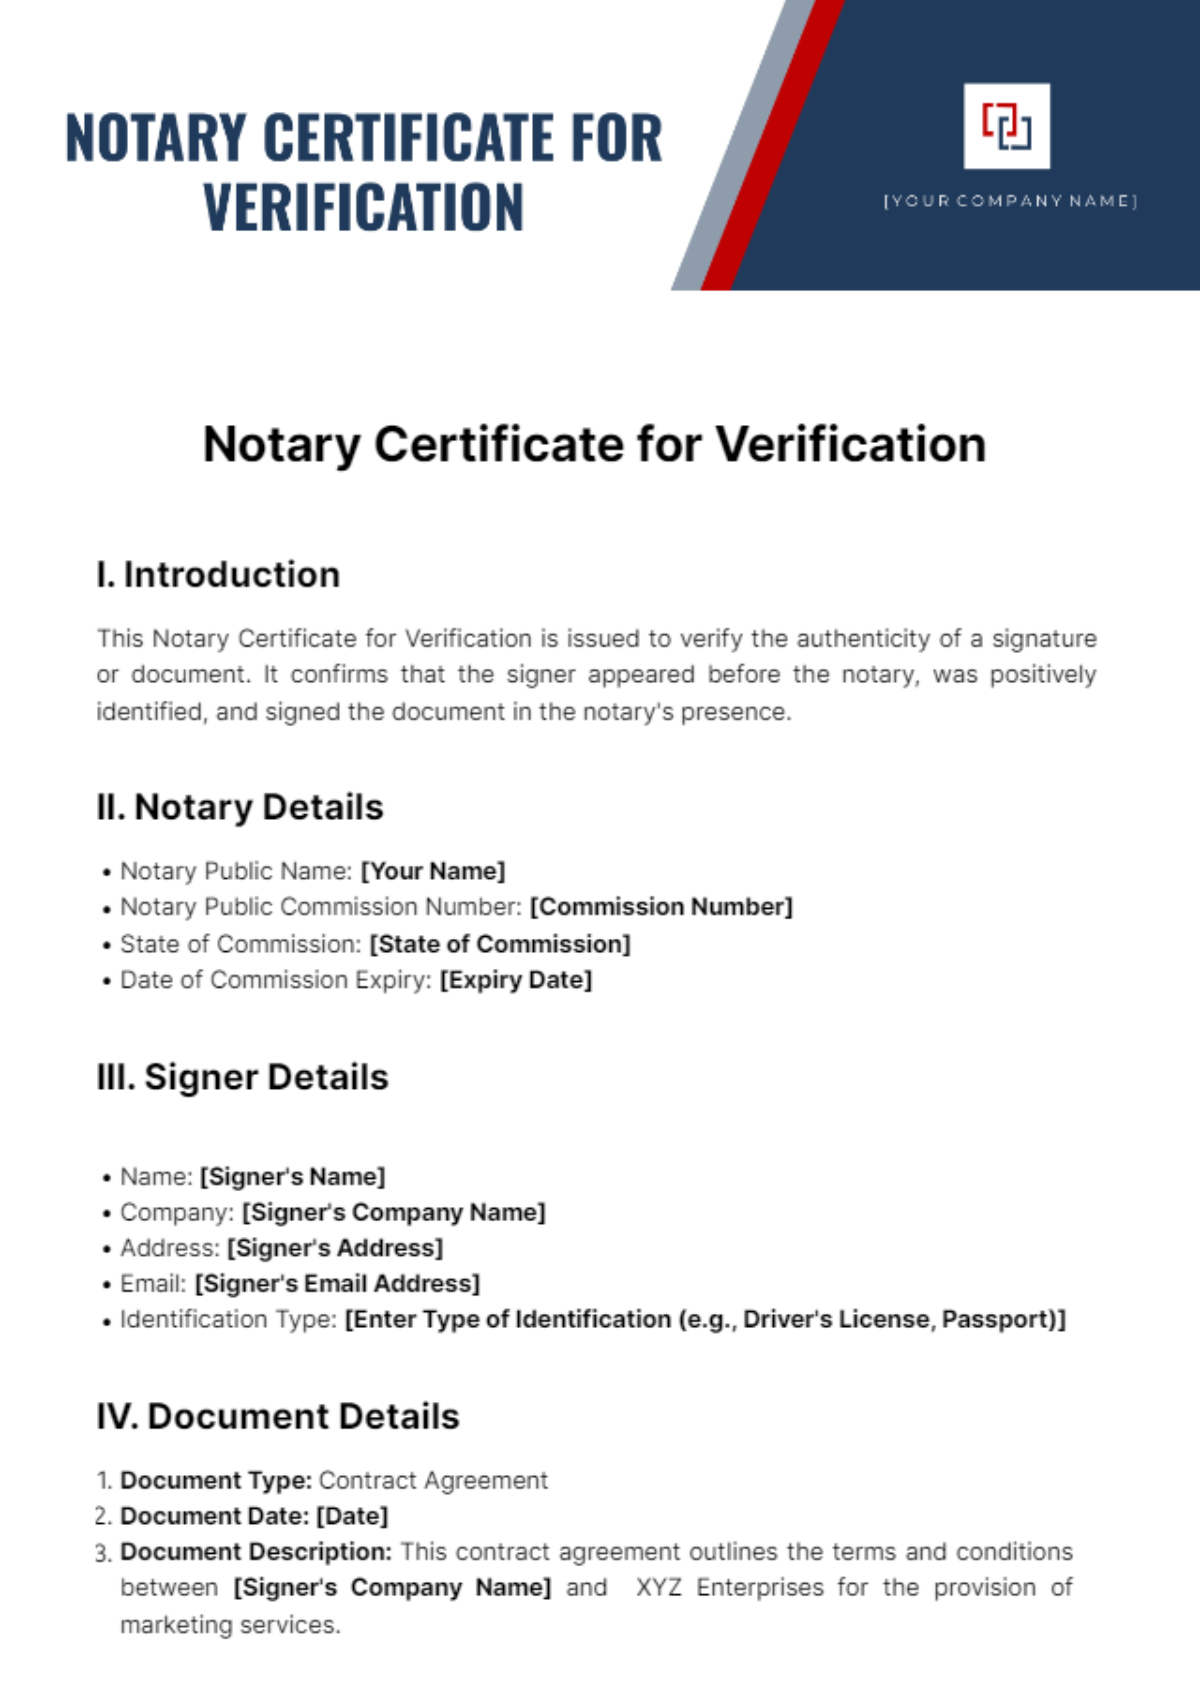 Free Notary Certificate For Verification Template